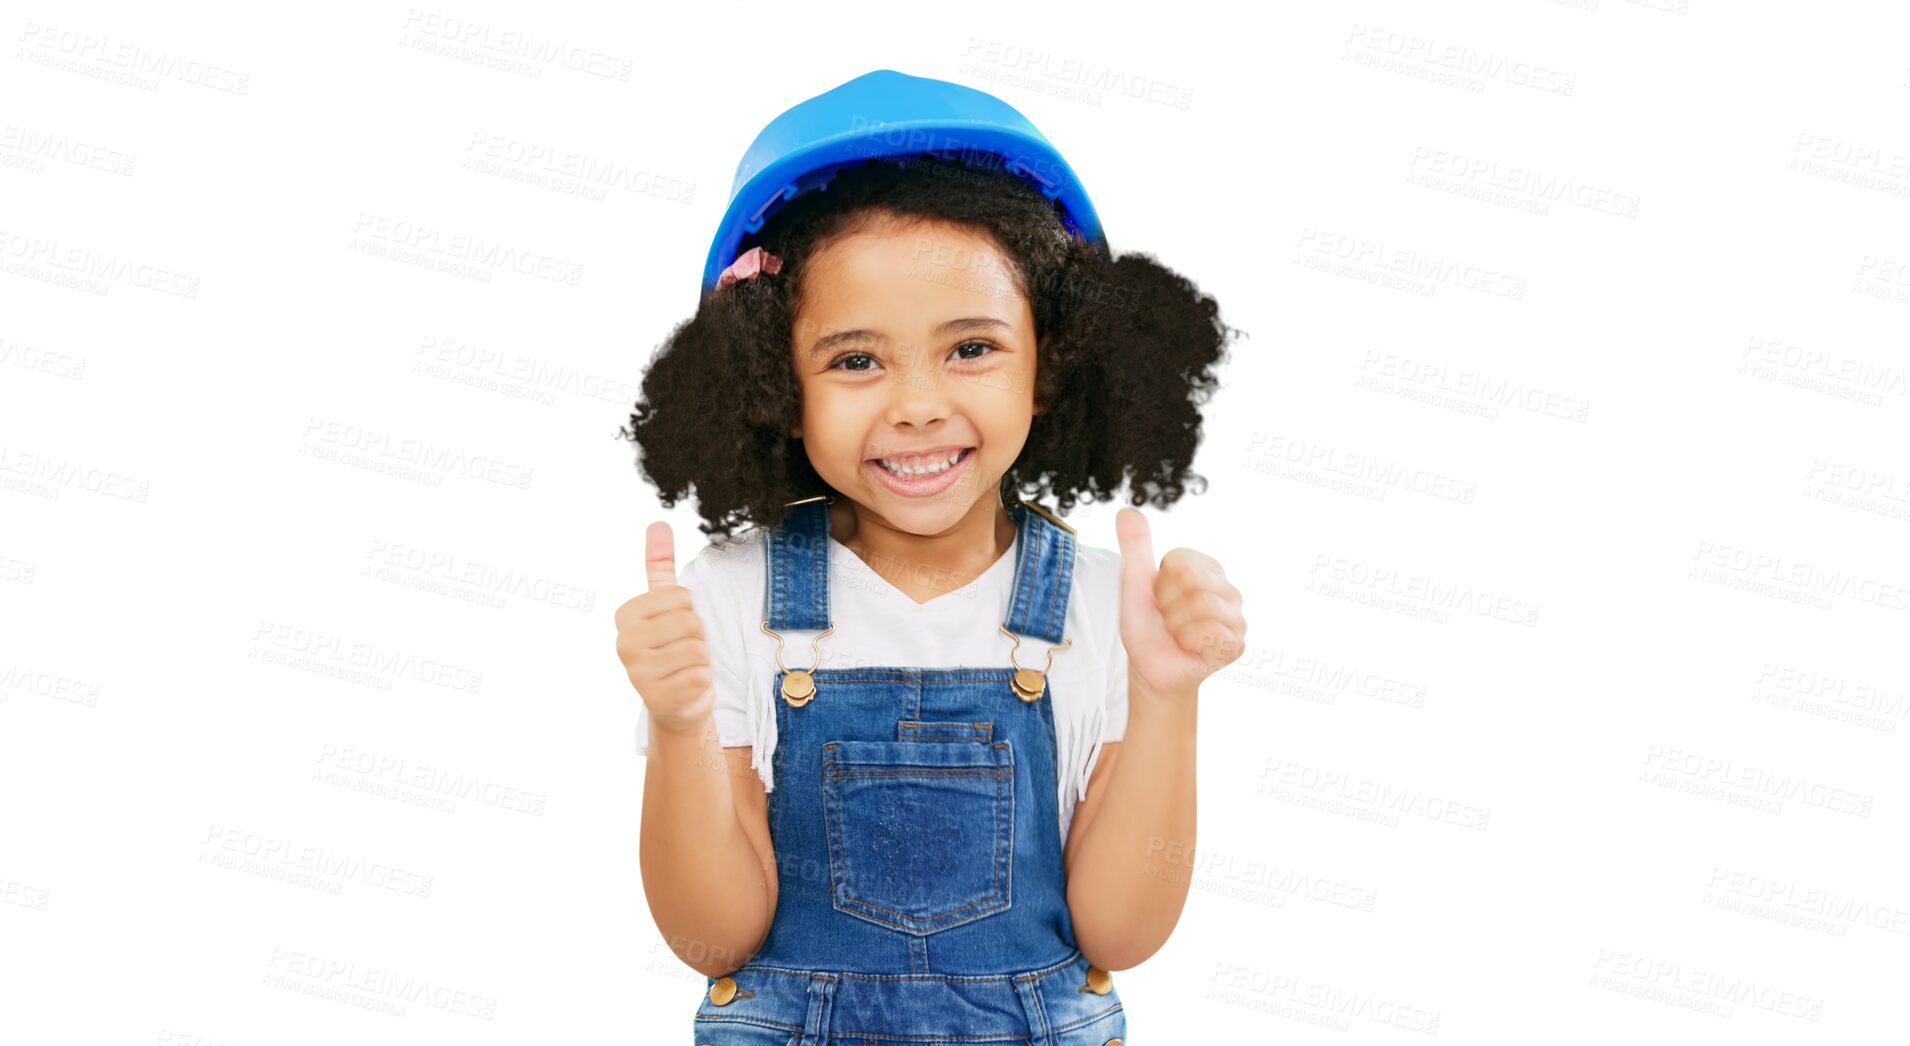 Buy stock photo Thumbs up, smile and construction with portrait of child on png for success, like or achievement. Yes, engineering and thank you with young girl isolated on transparent background for safety and sign